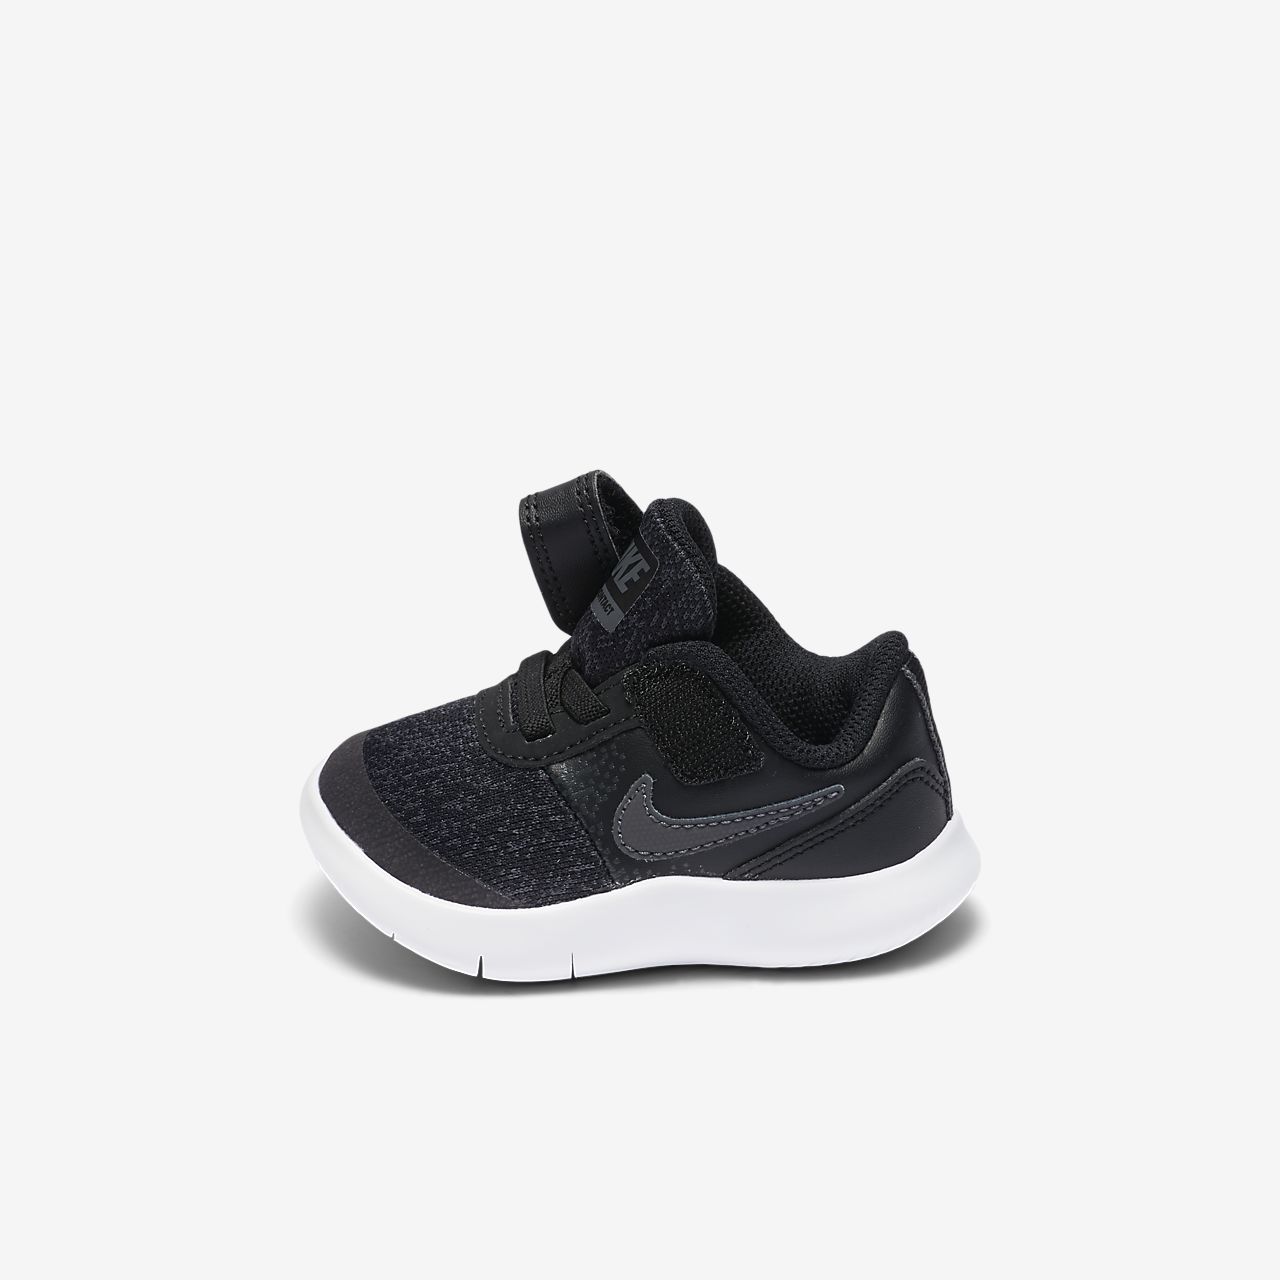 nike flex contact baby shoes off 60 